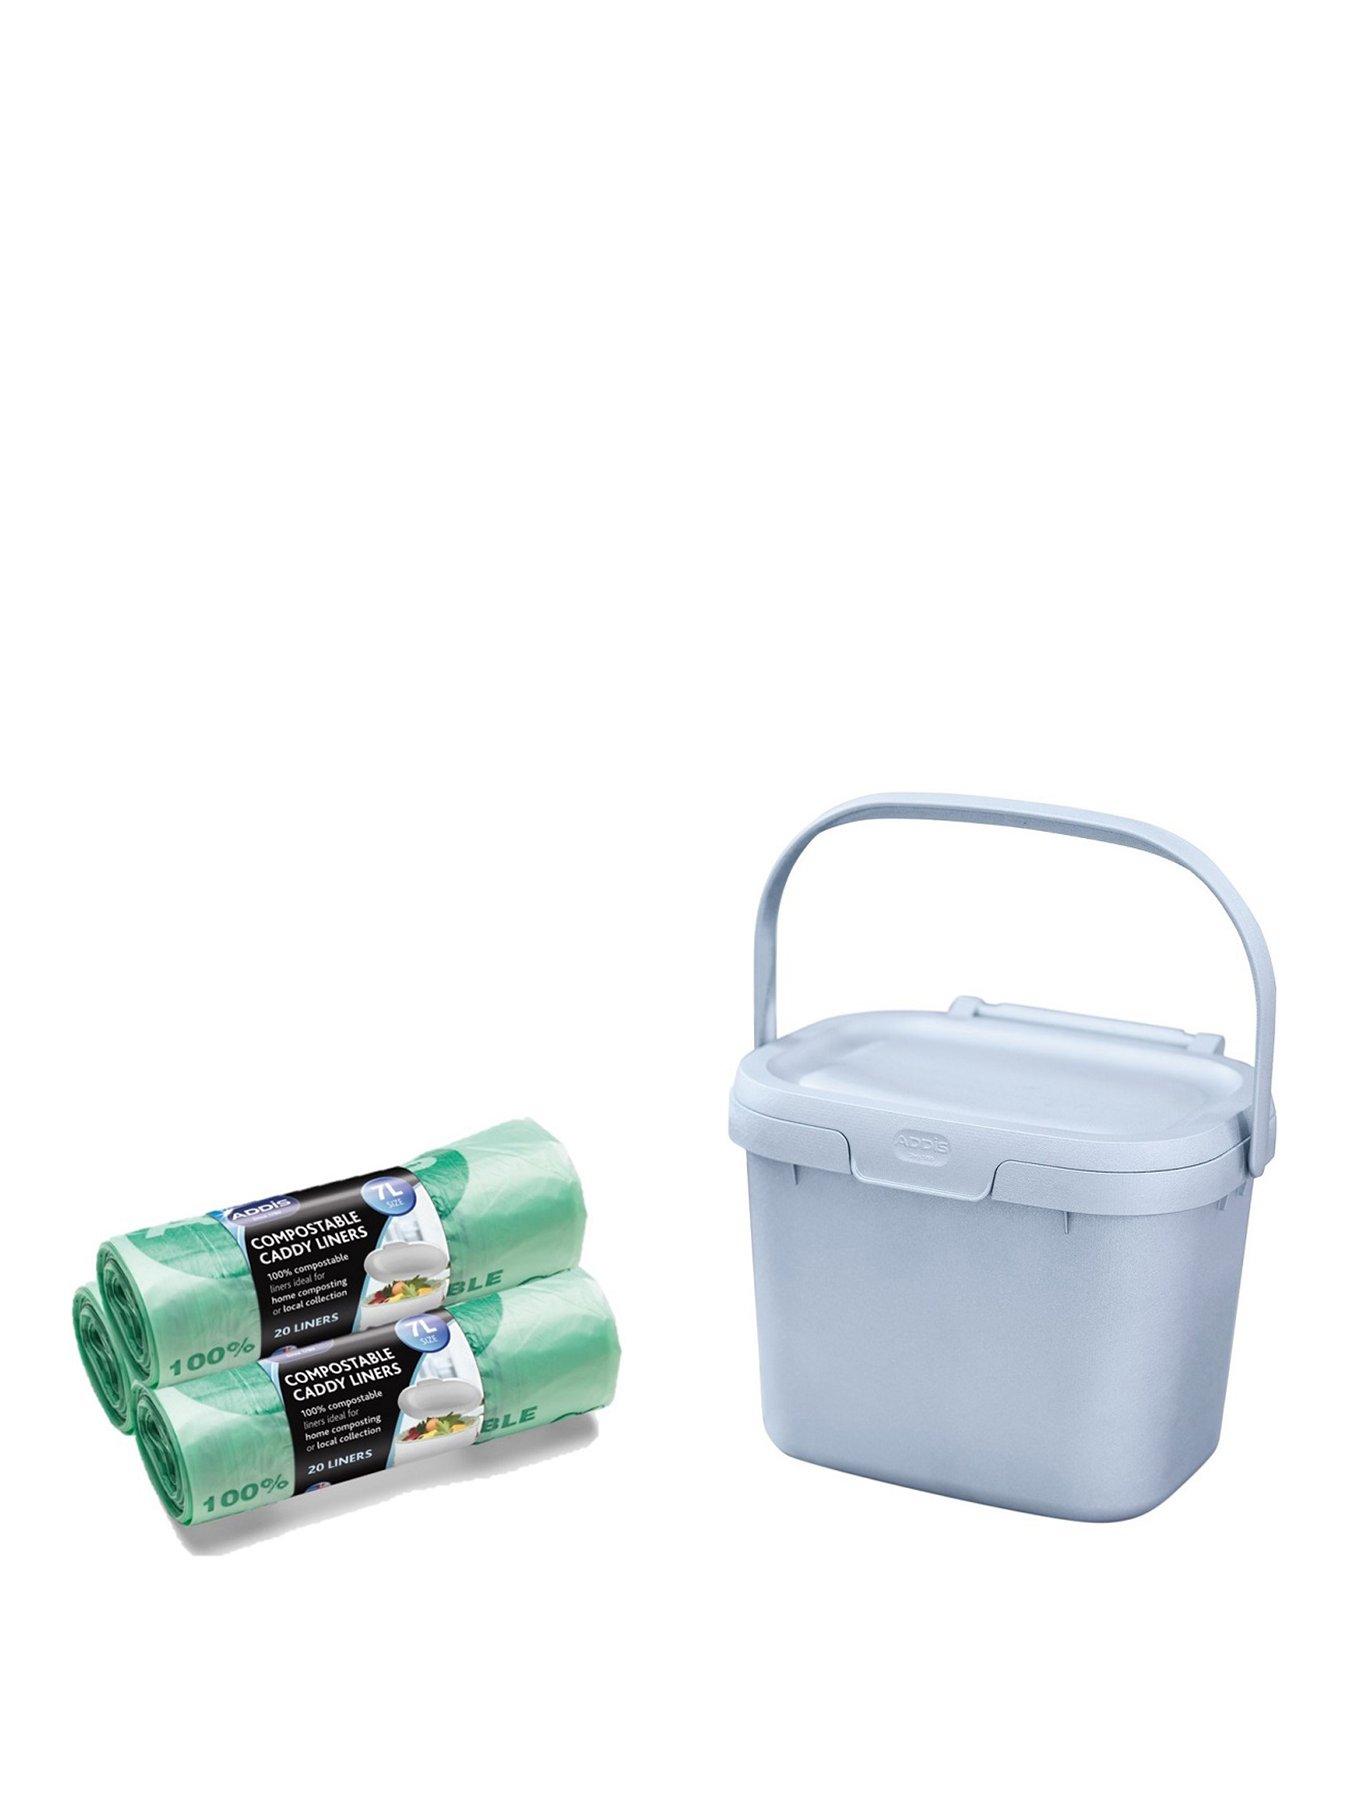 addis eco compost food caddy bin with 60 compostable liner